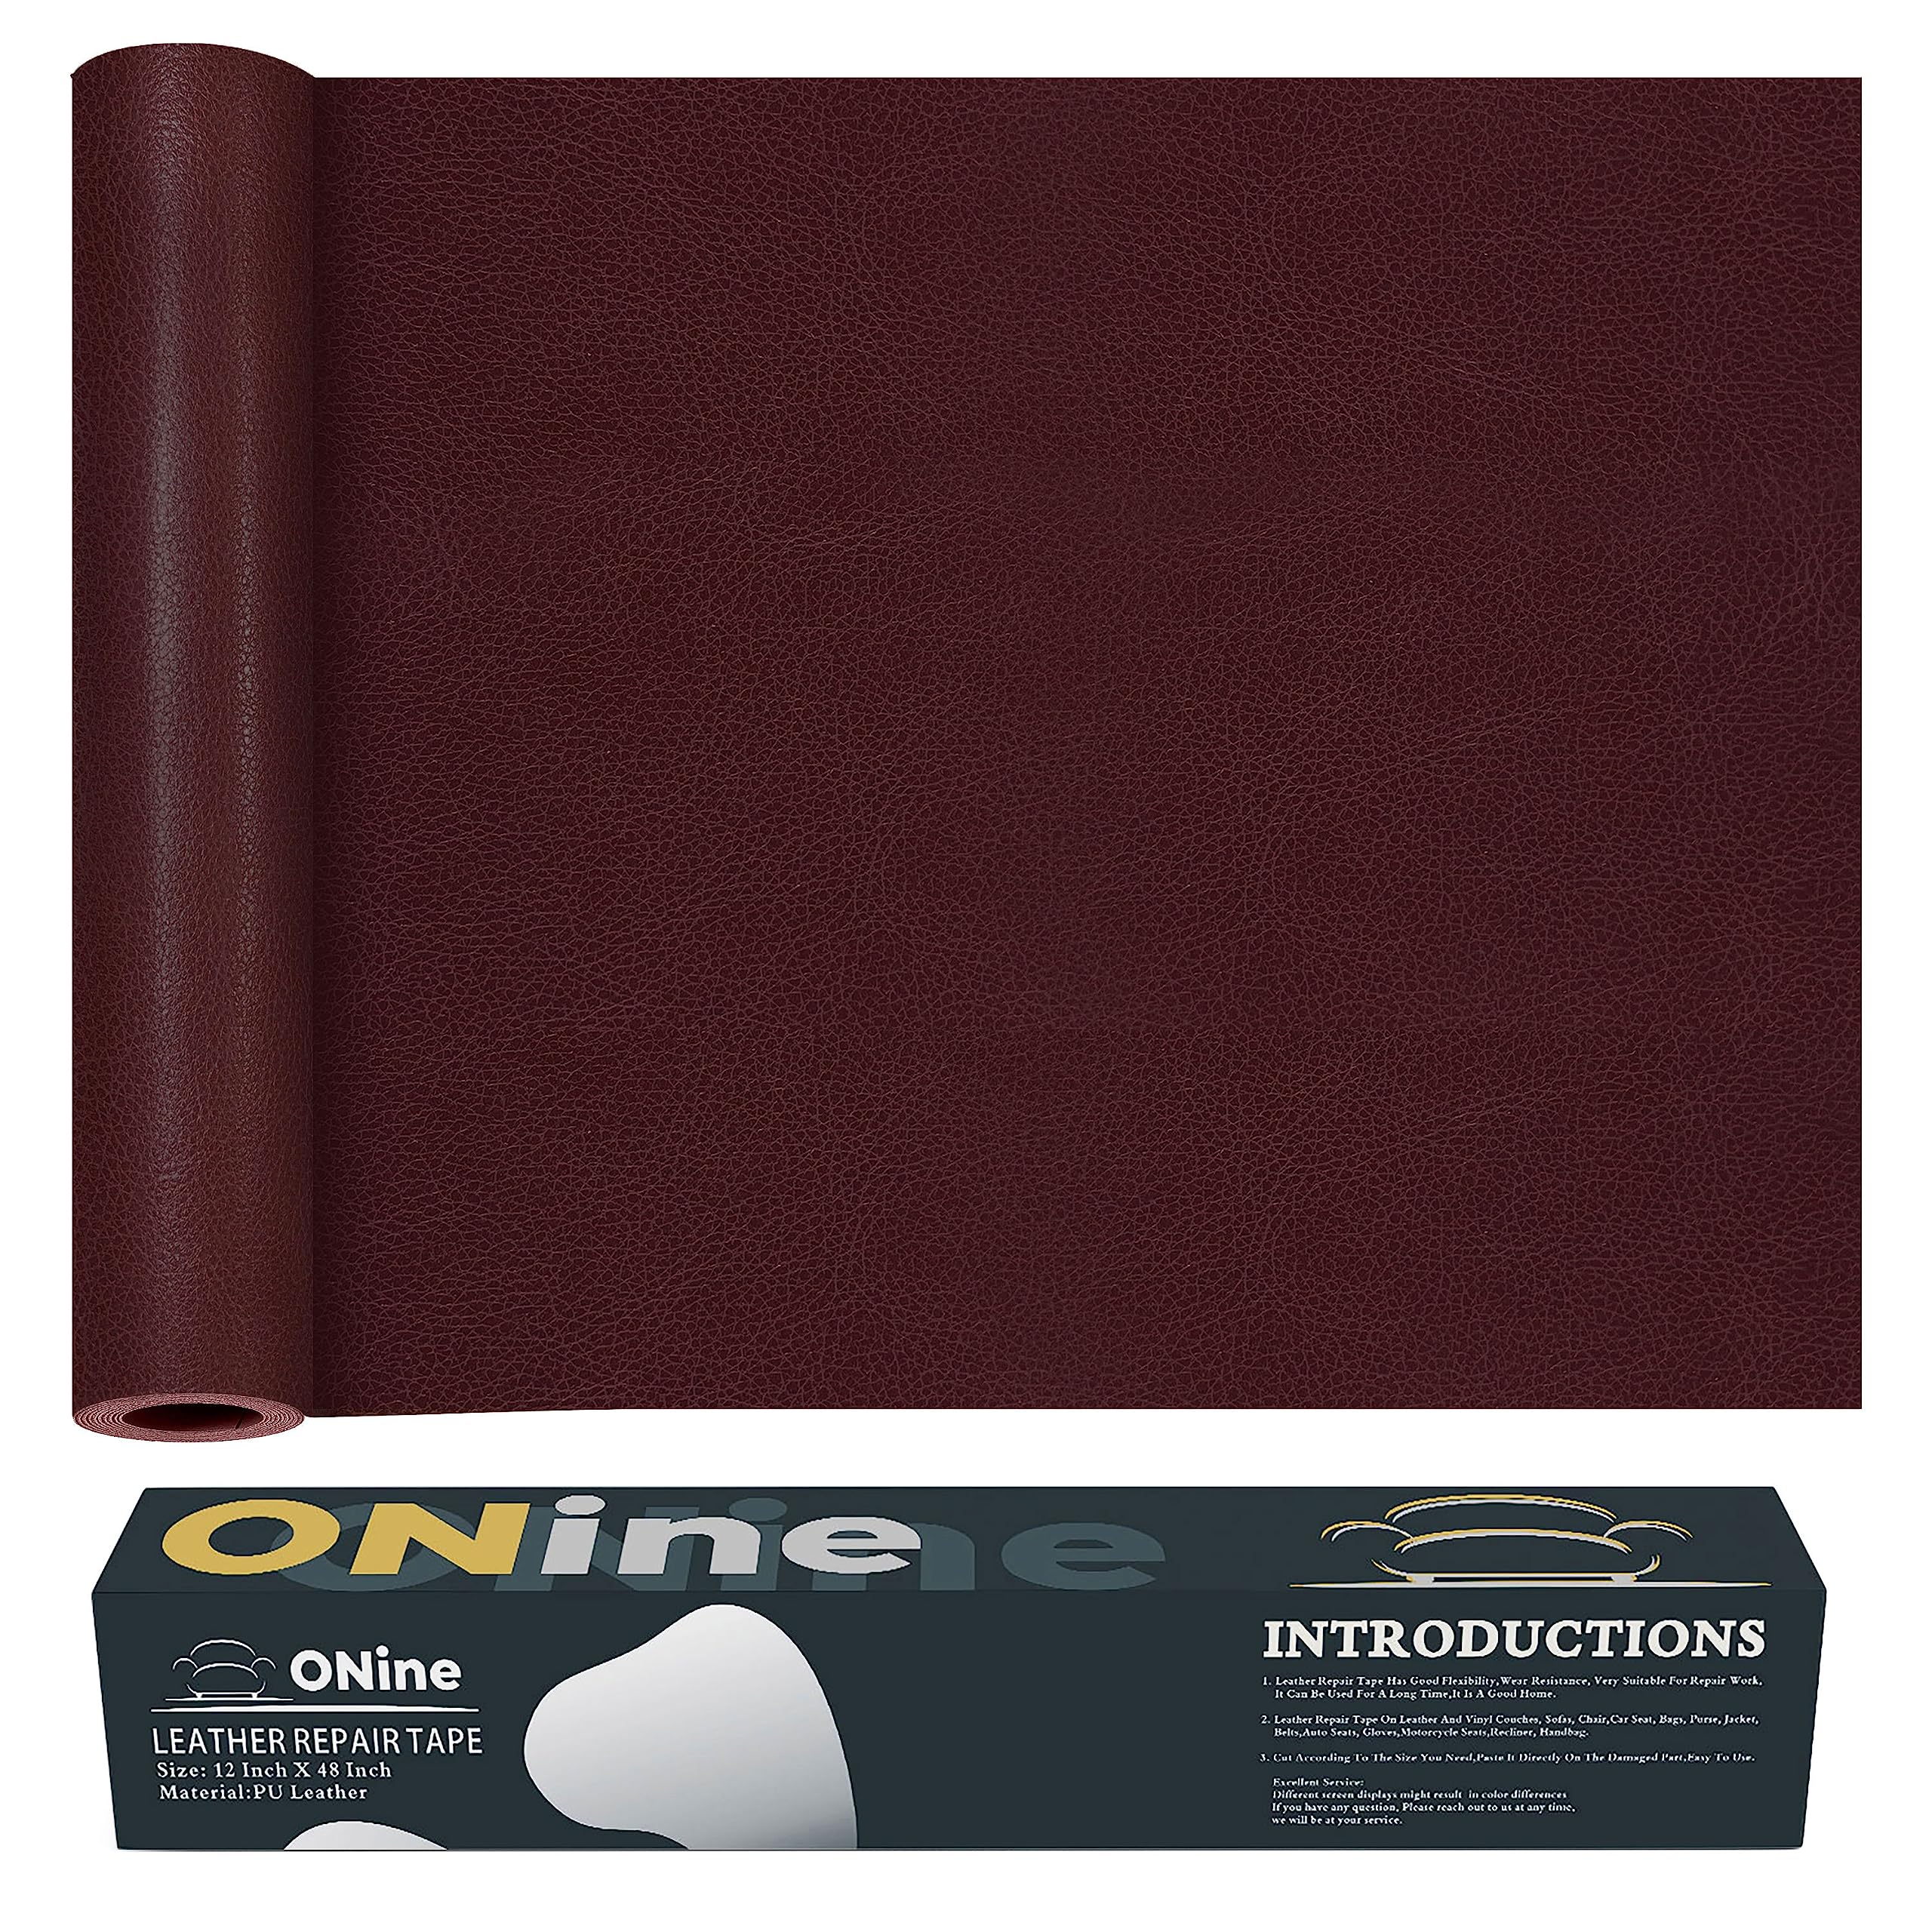 ONine Leather Repair Patch,Leather Repair Tape, 12 x 48 inches Leather Repair Patch for Furniture,Vinyl Repair kit,Leather Couch Patch